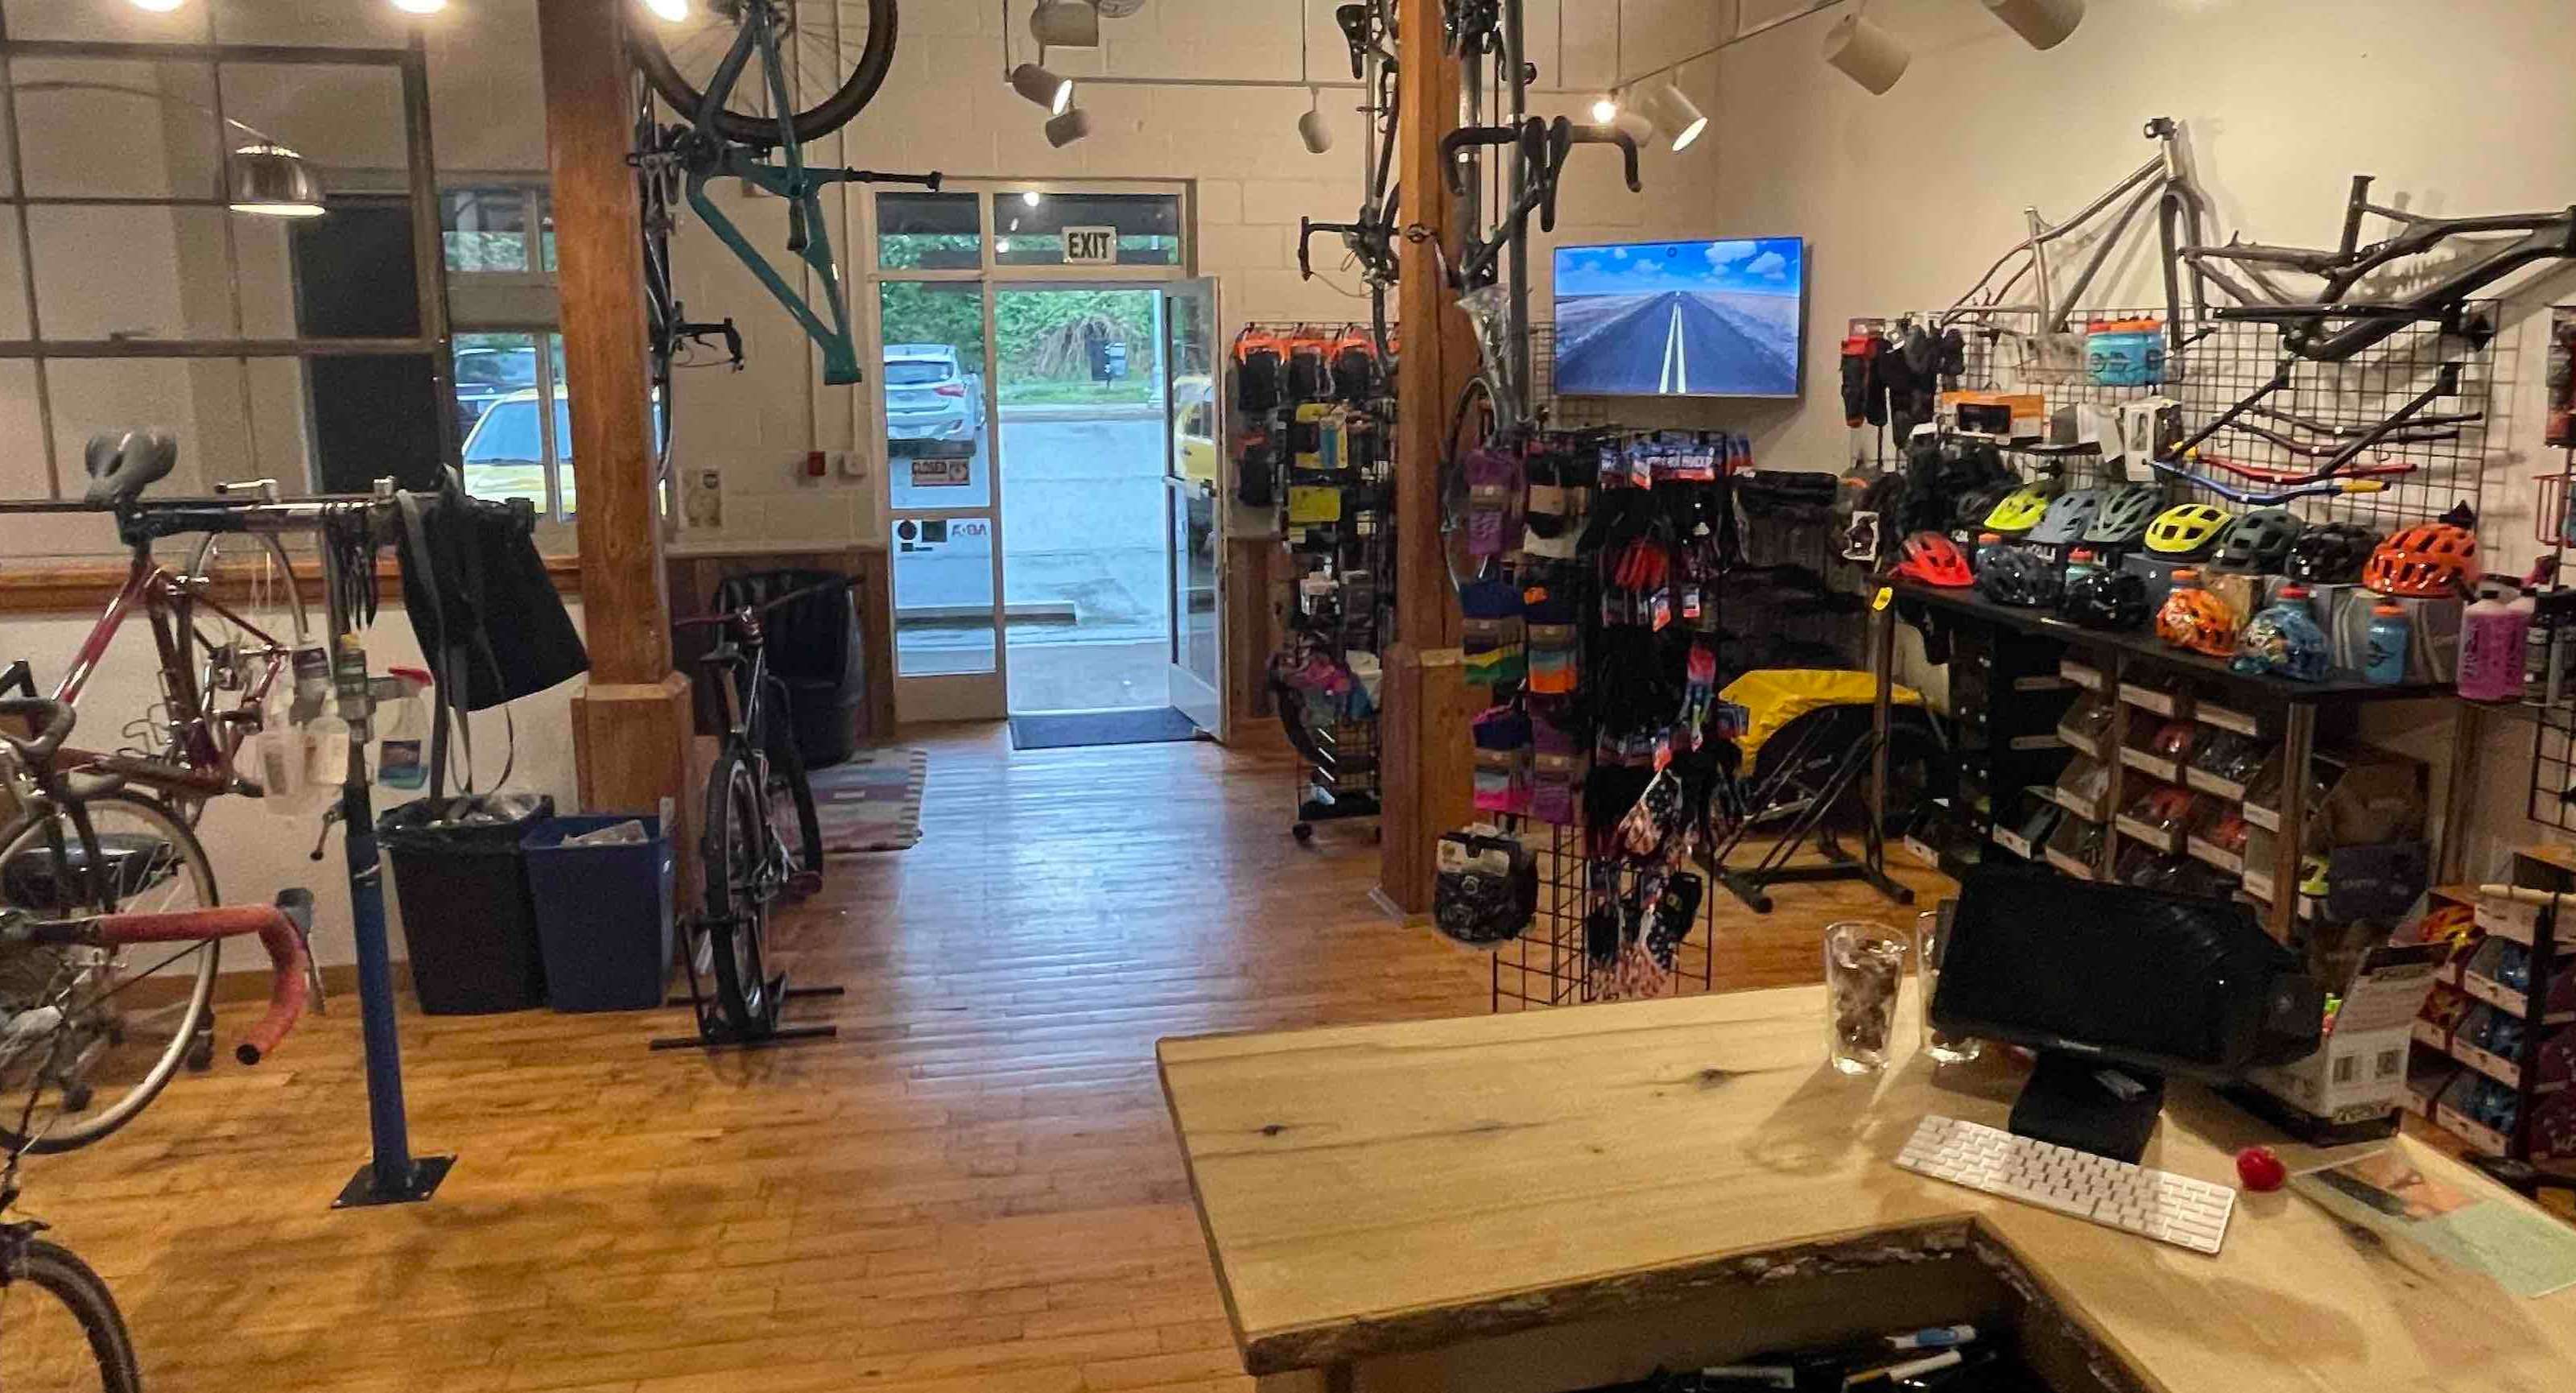 Bikes in the shop